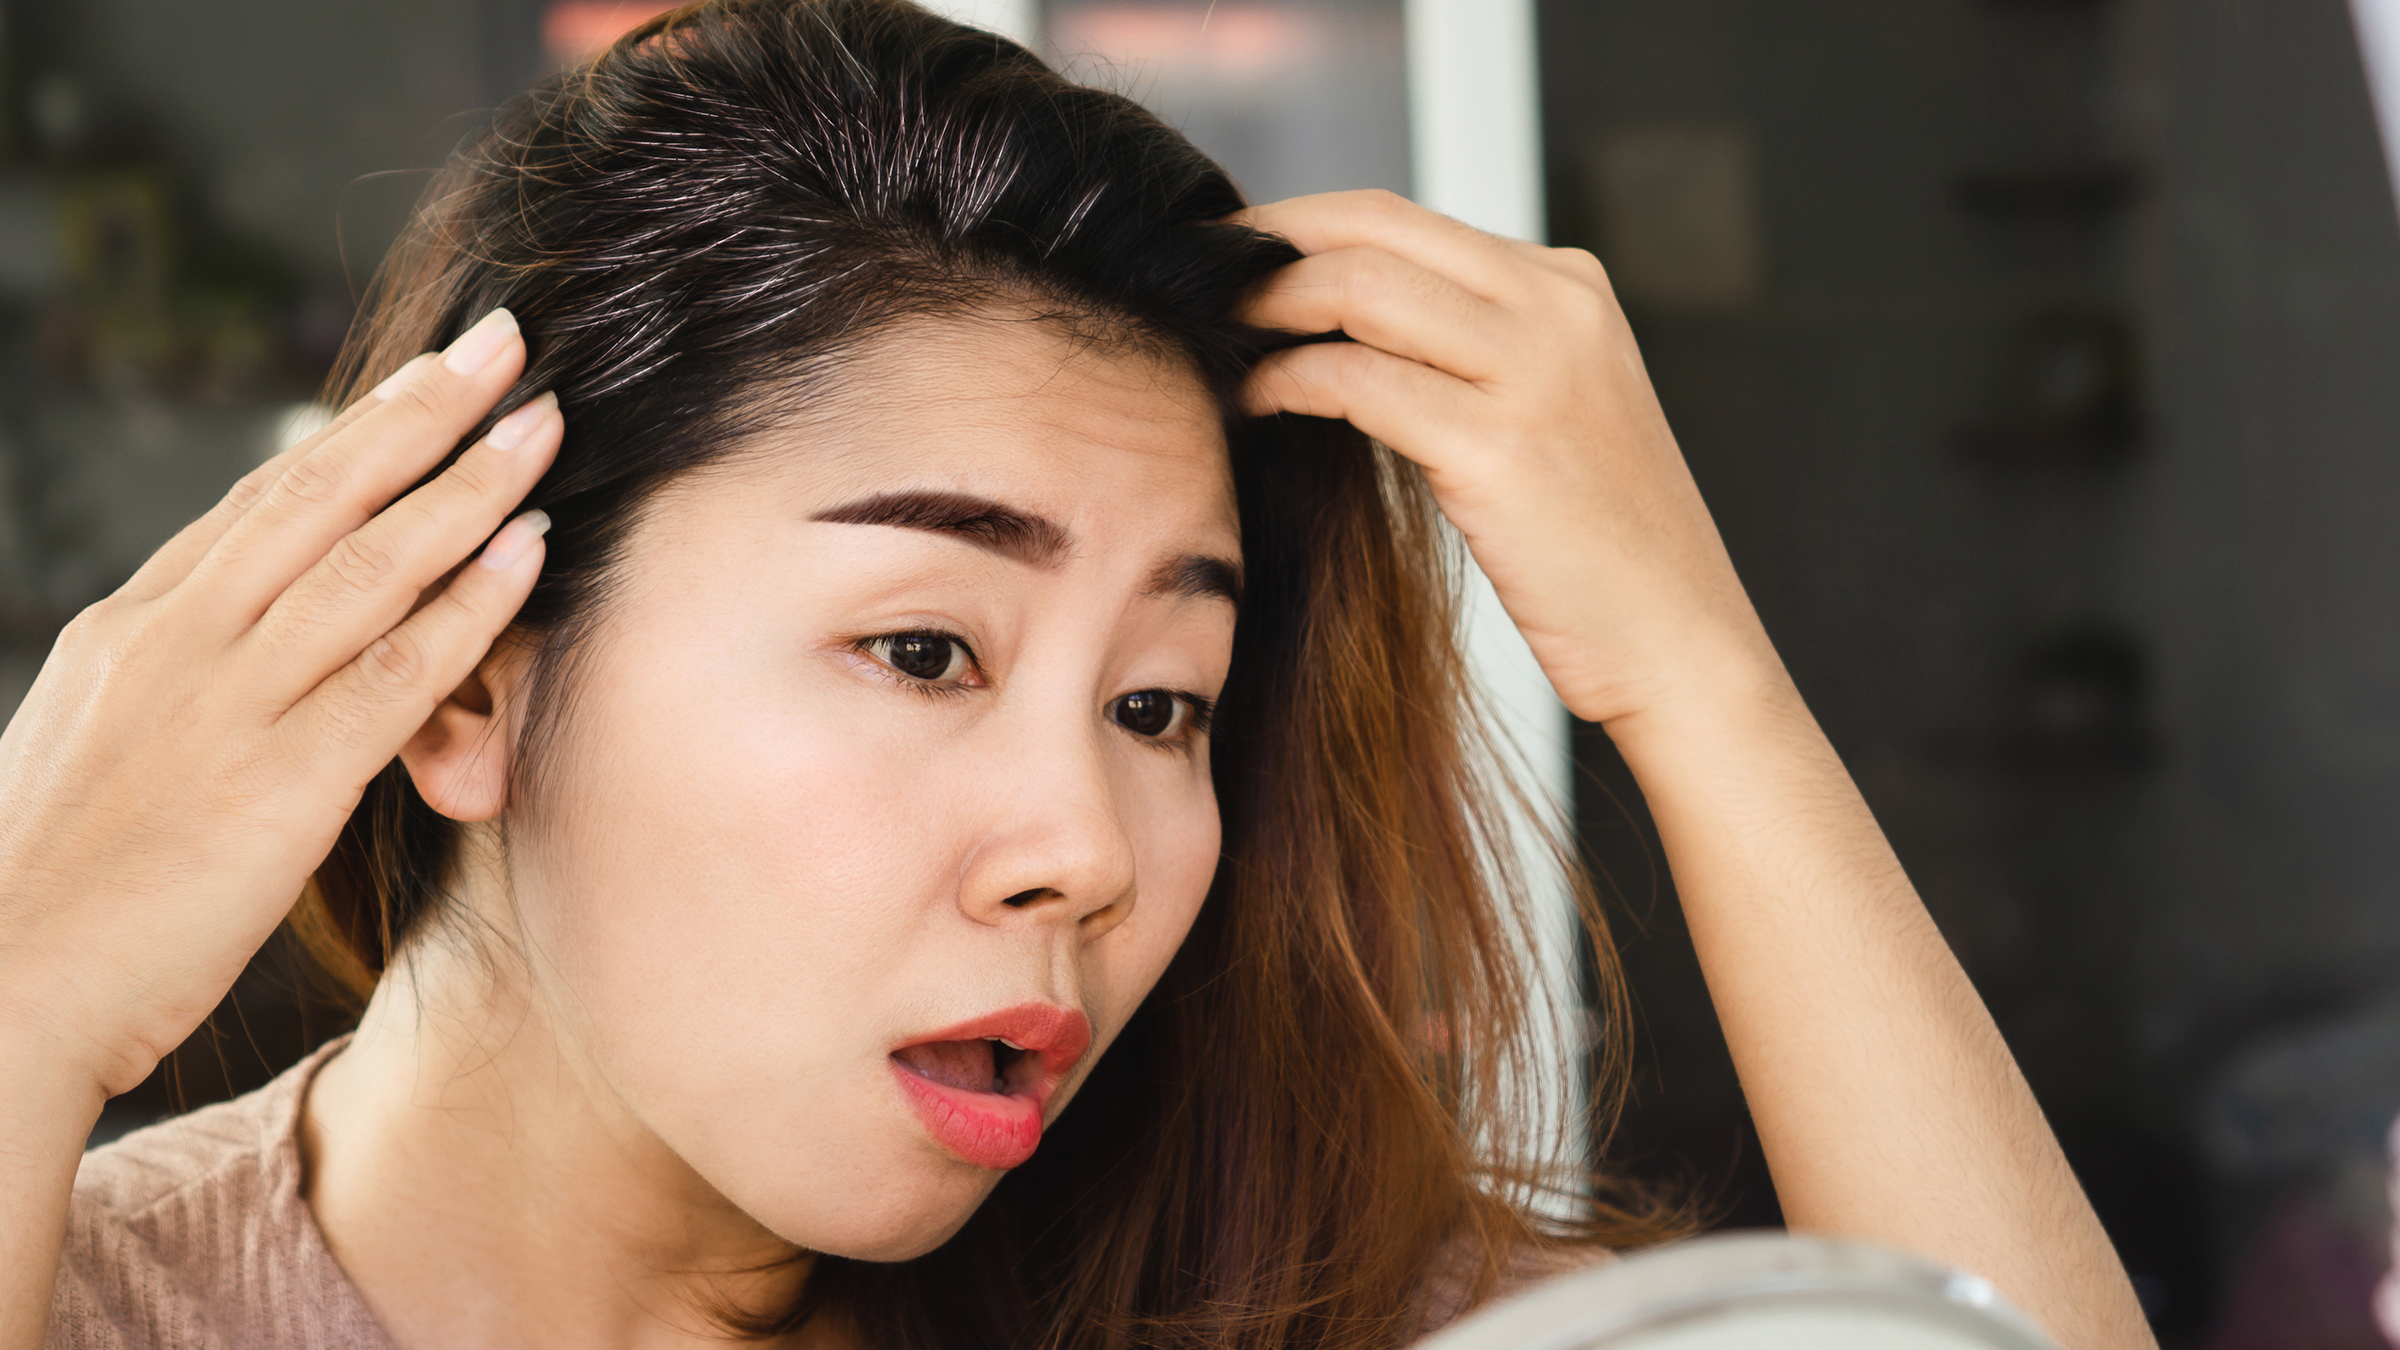 How to Prevent Gray Hair According to Experts